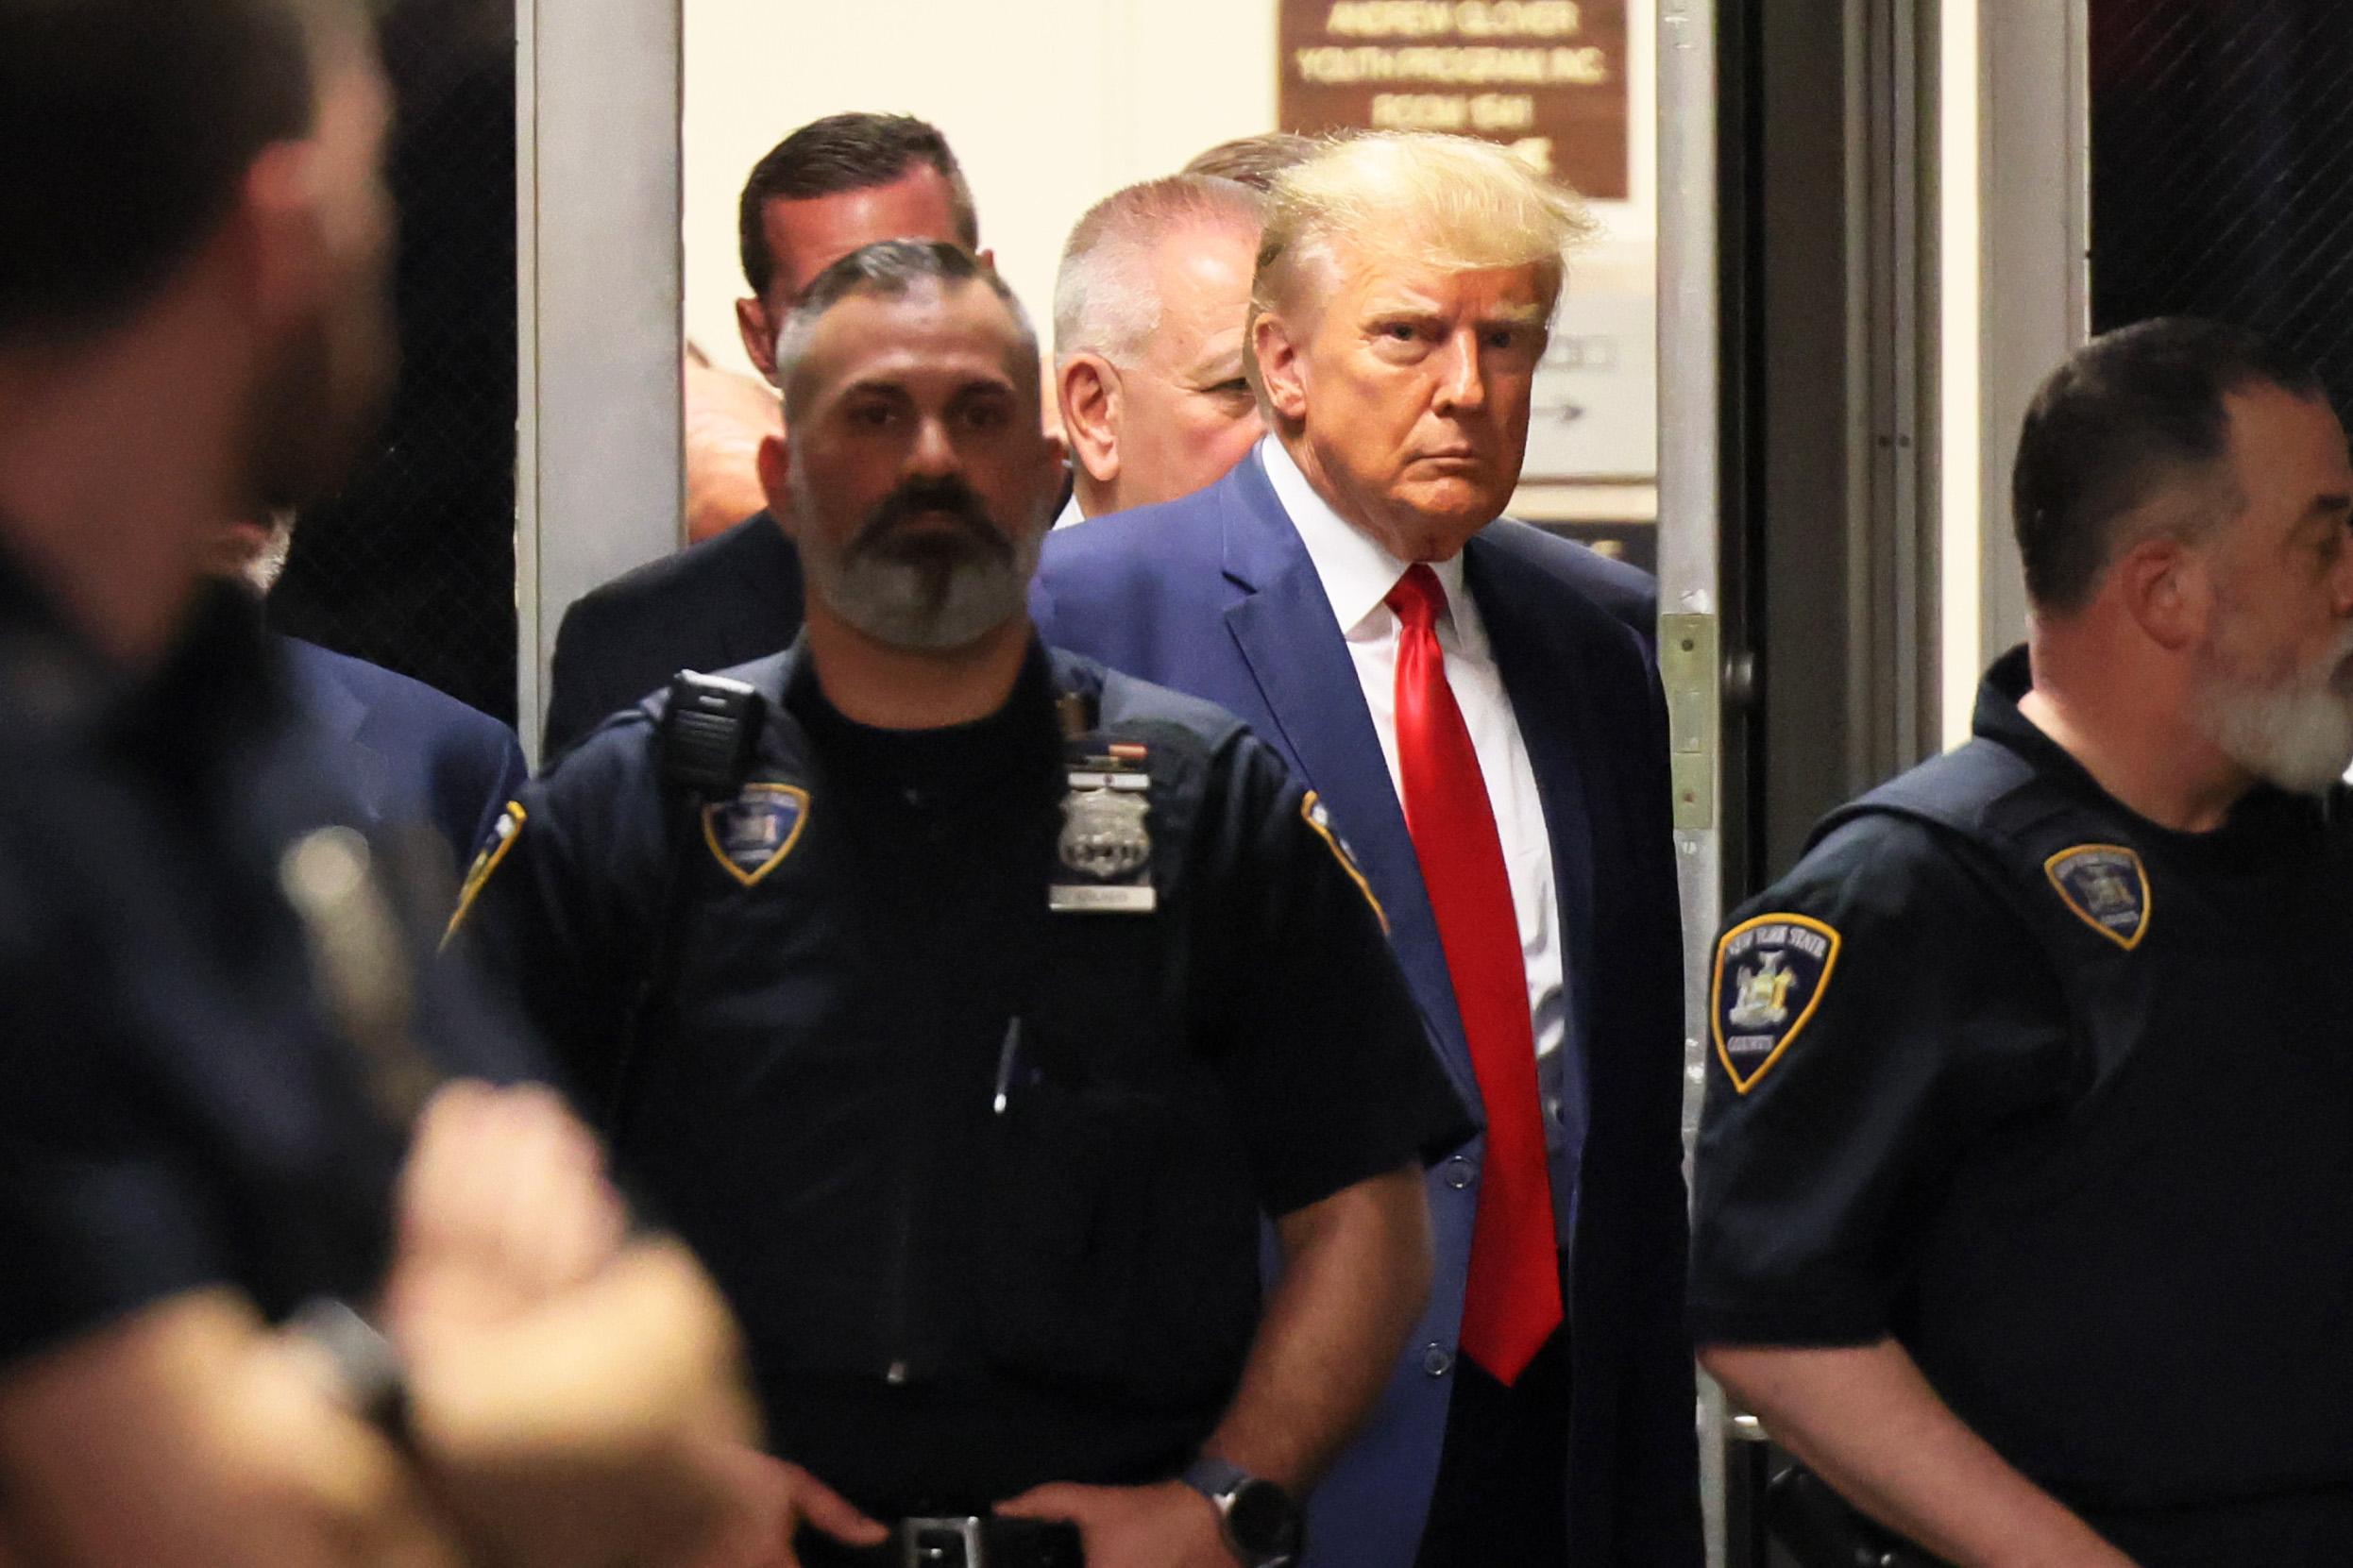 Trump glaring behind a couple of police officers.